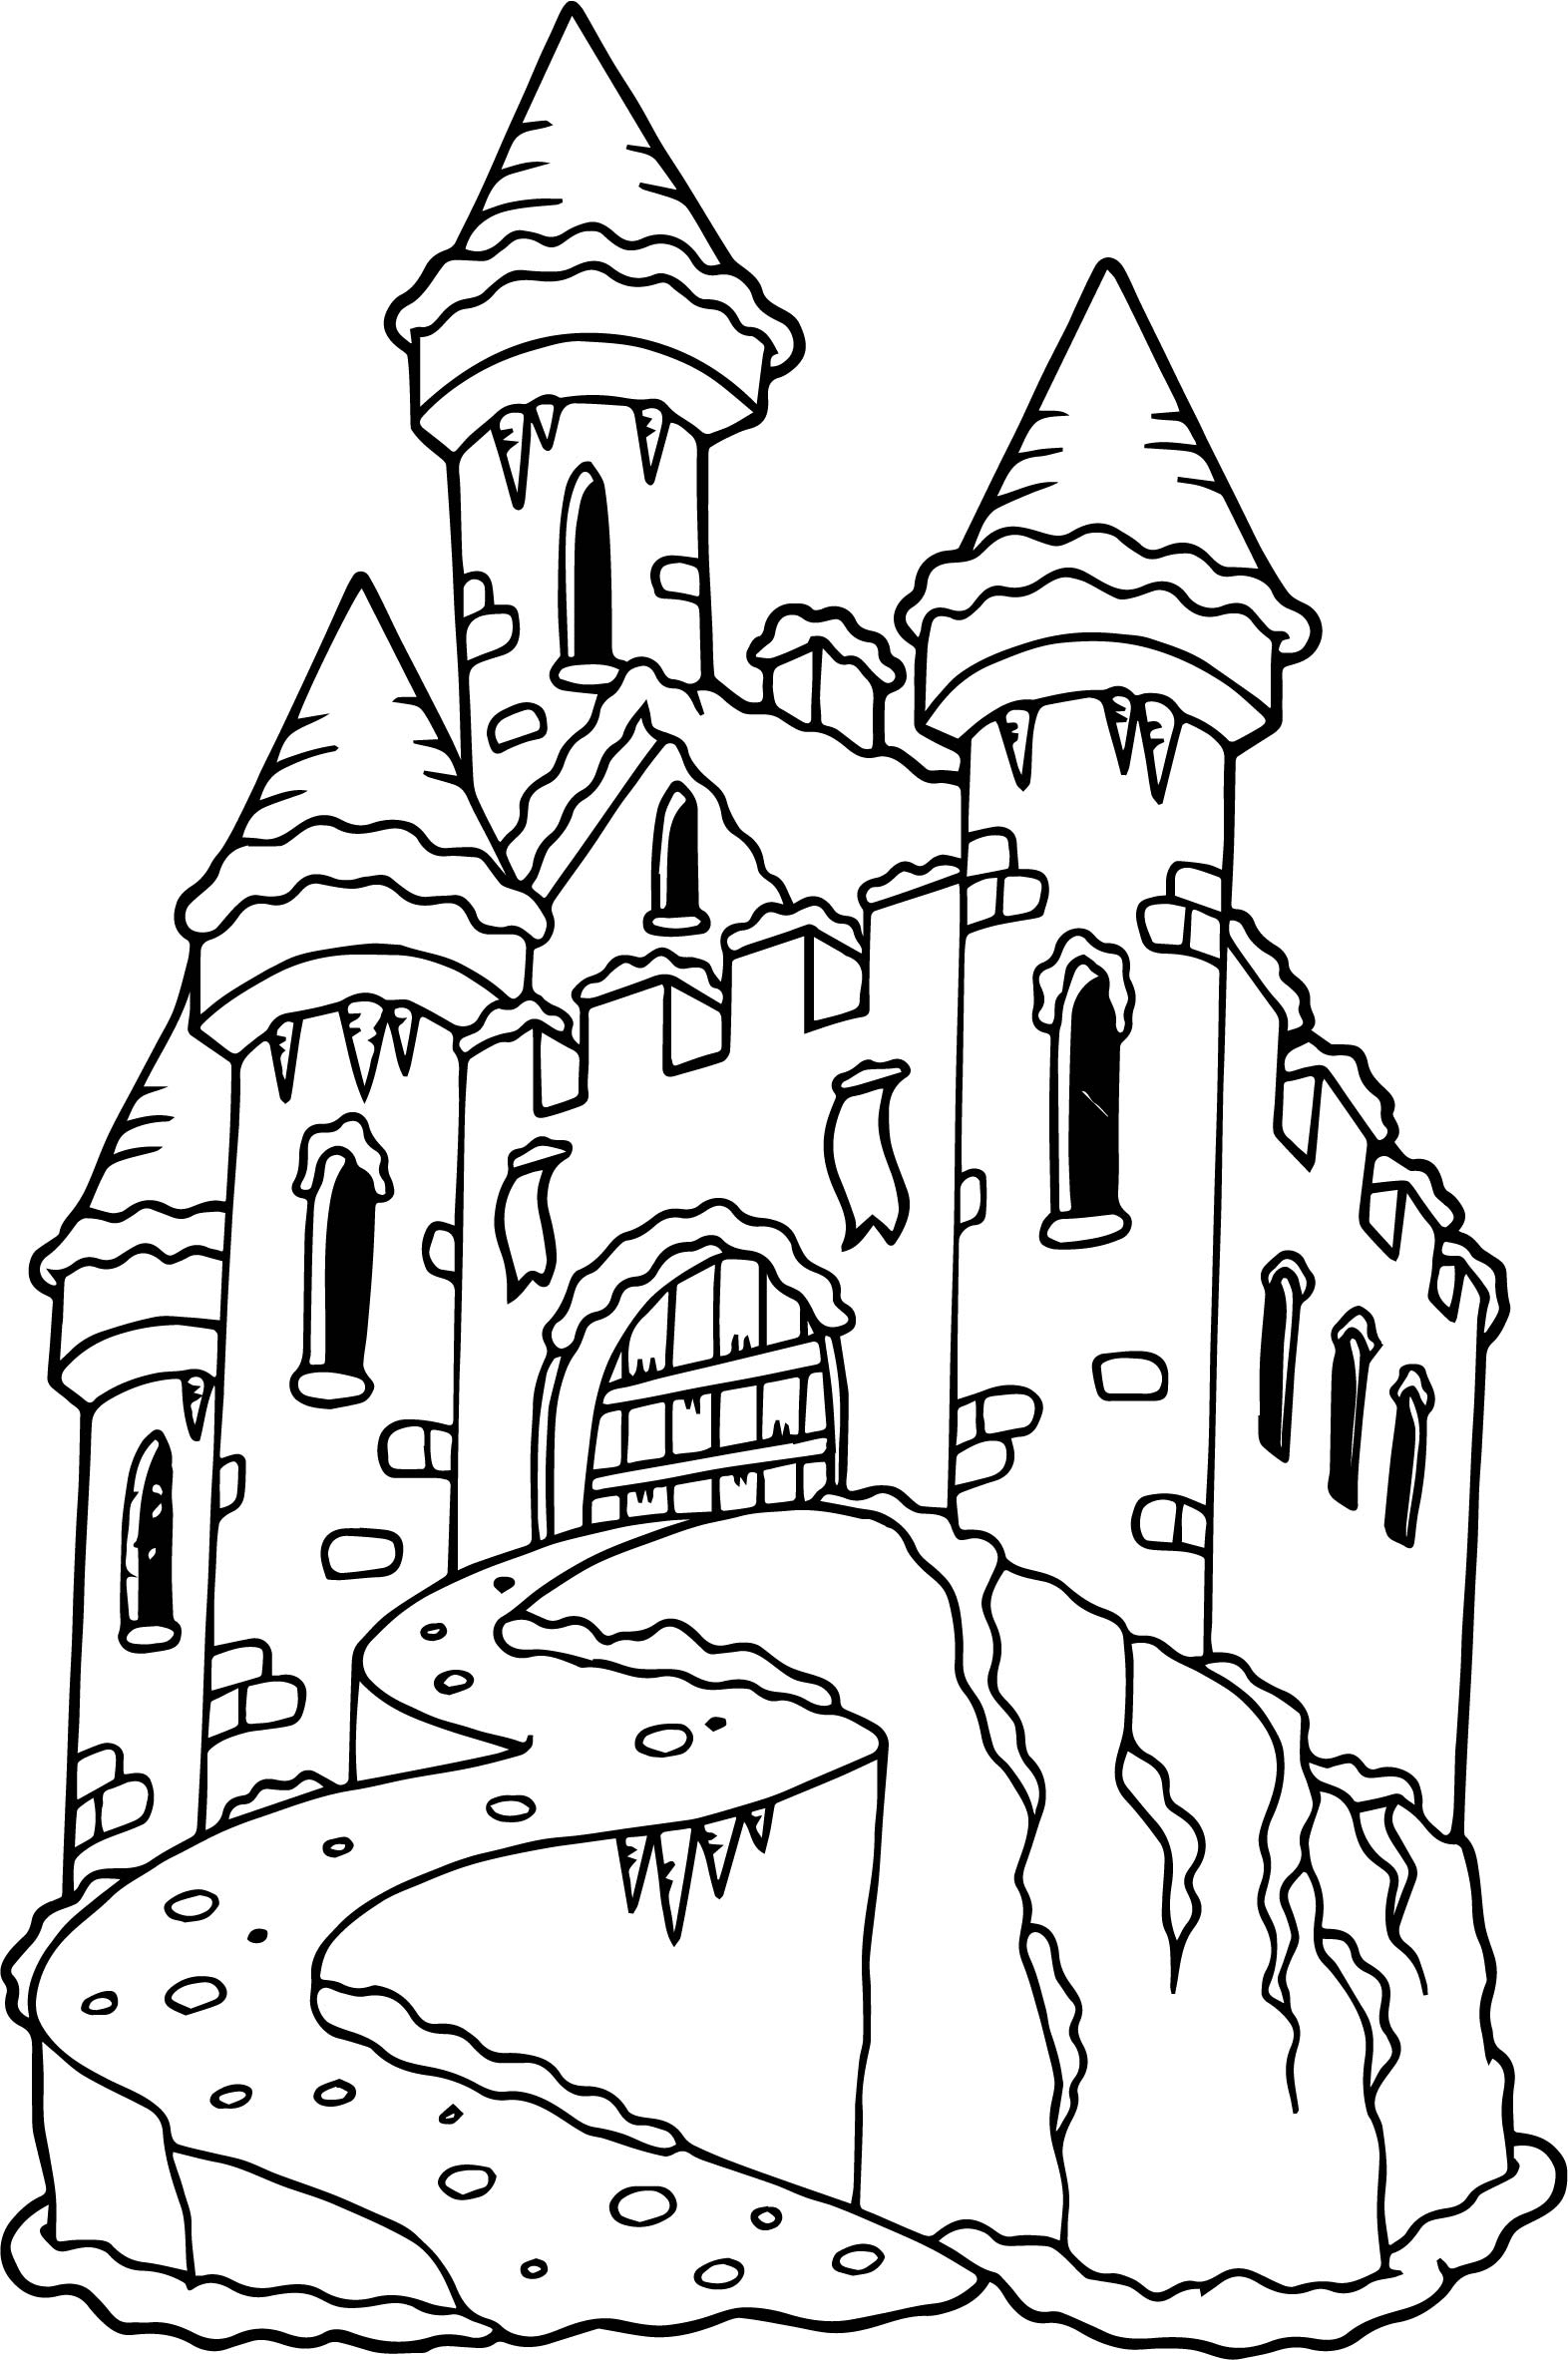 Dragon And Castle Coloring Pages at